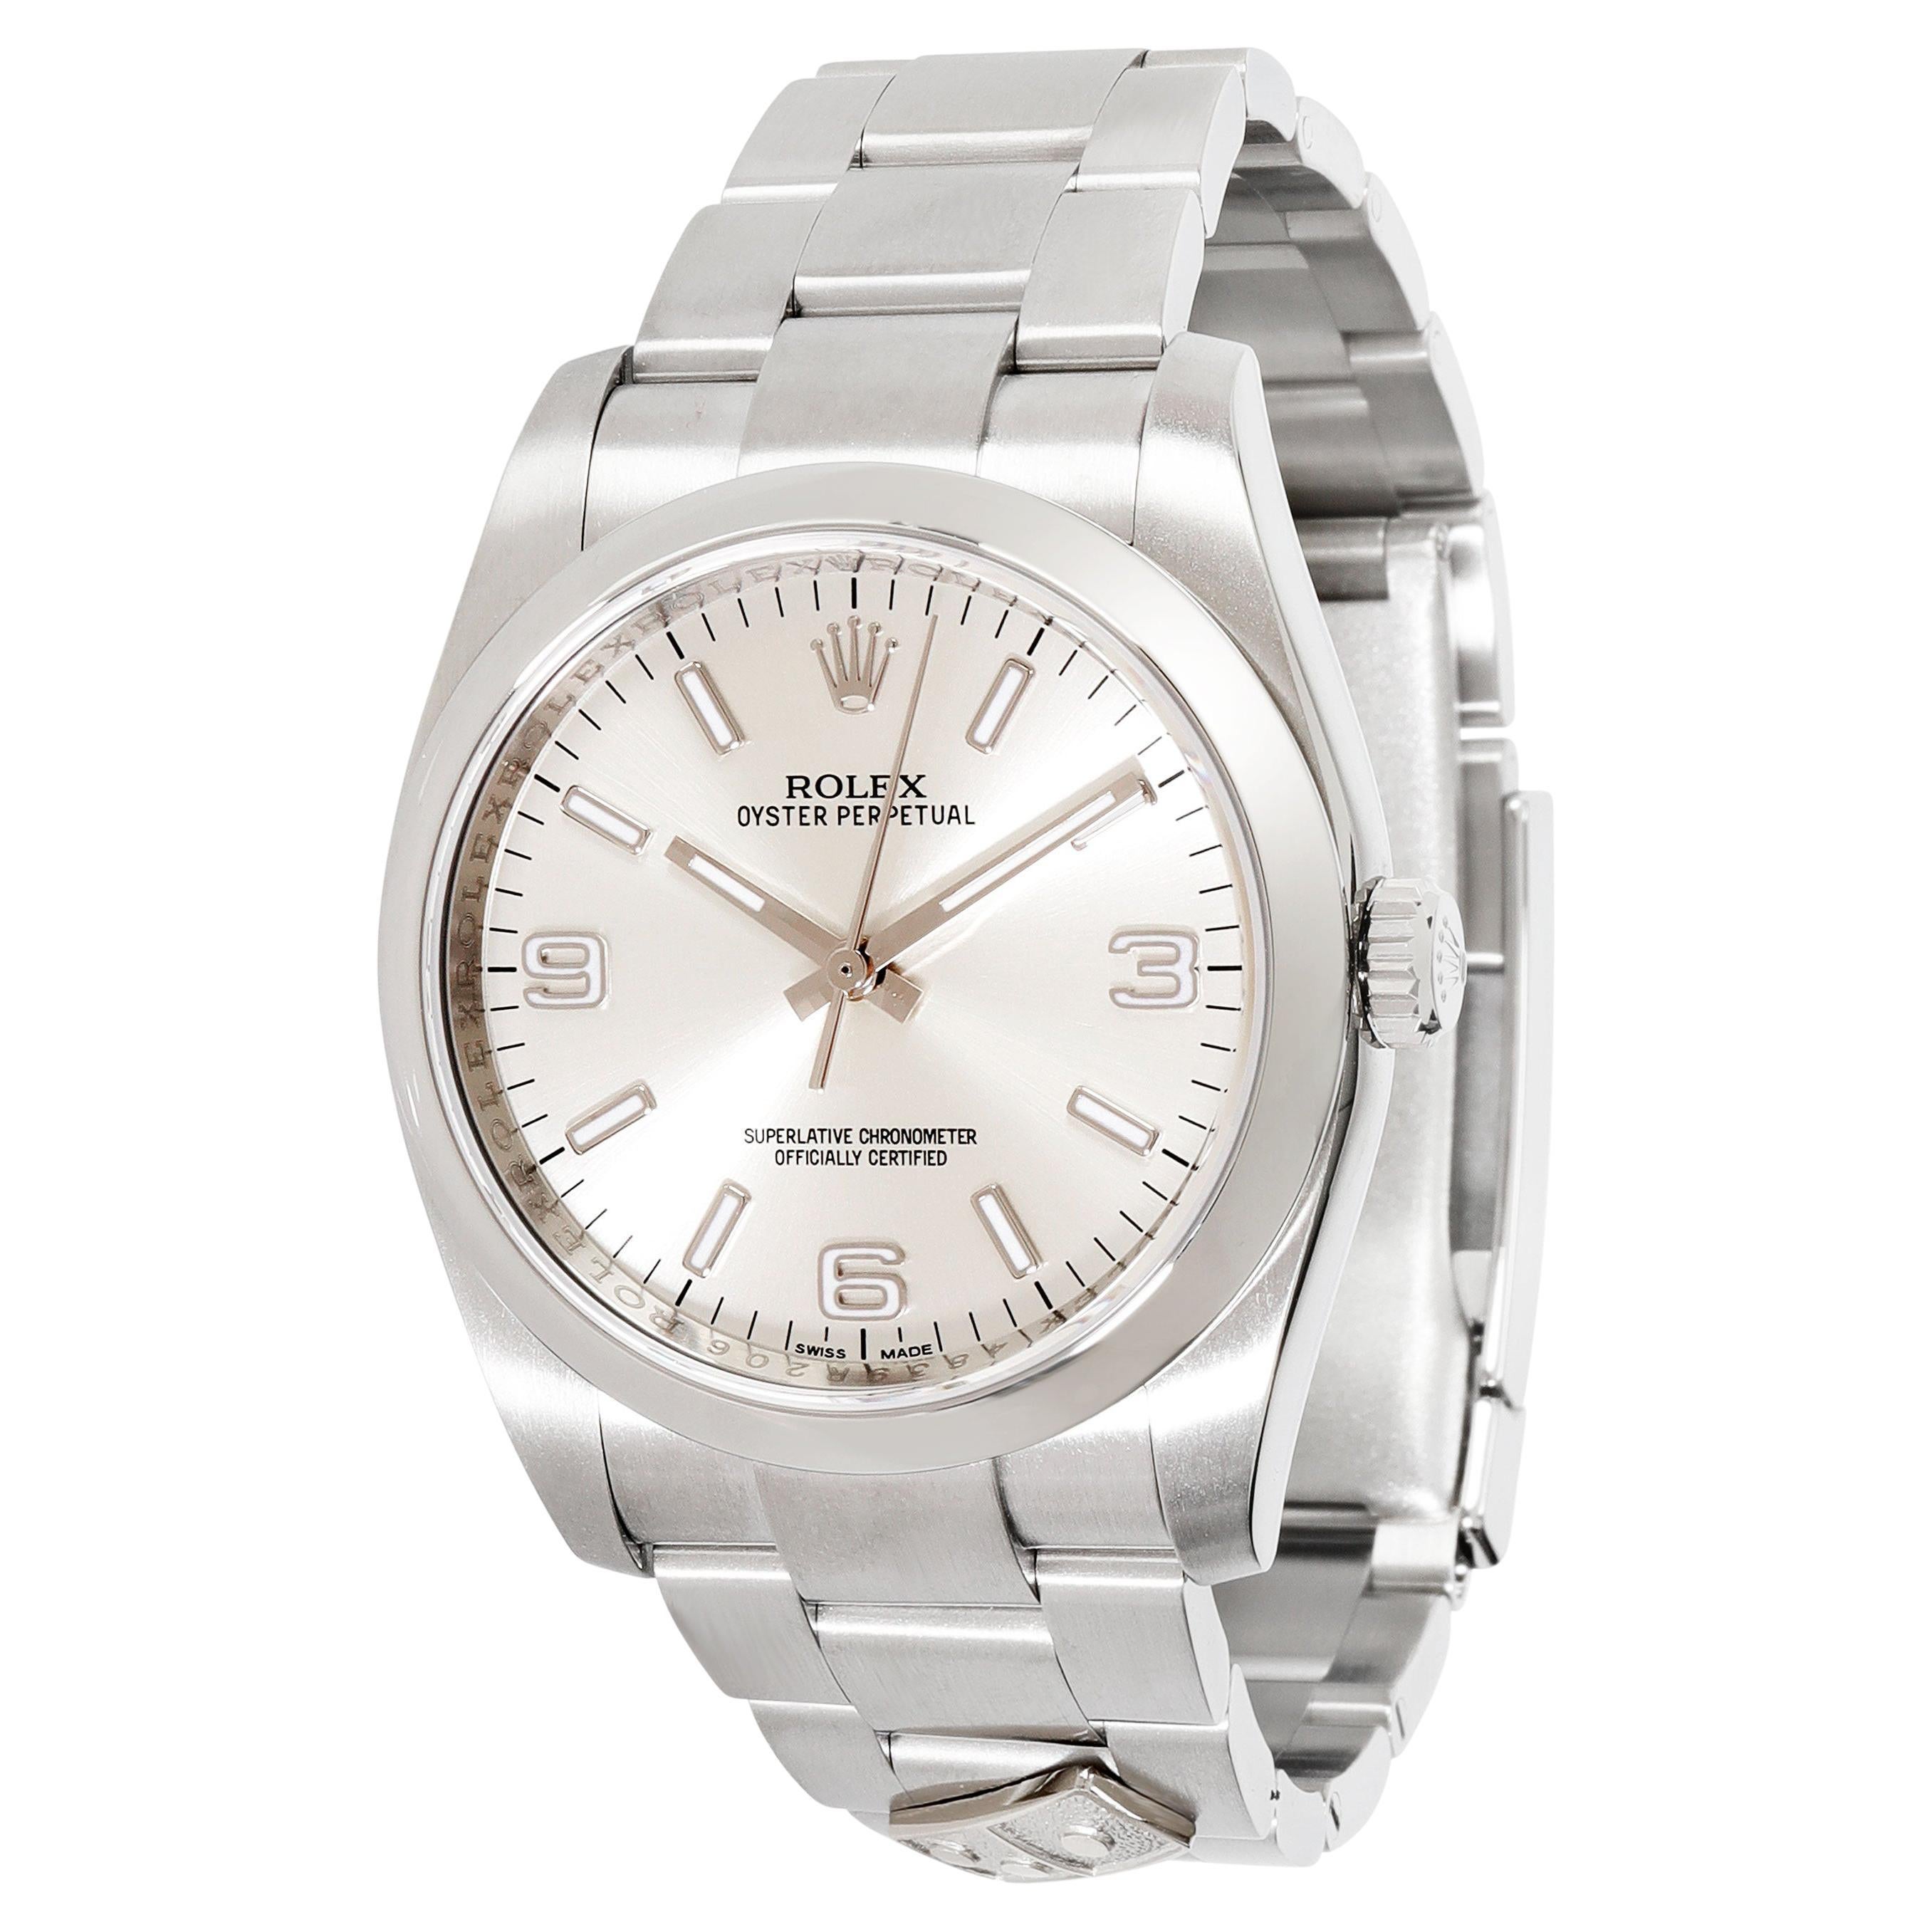 Rolex Oyster Perpetual 116000 Men's Watch in Stainless Steel